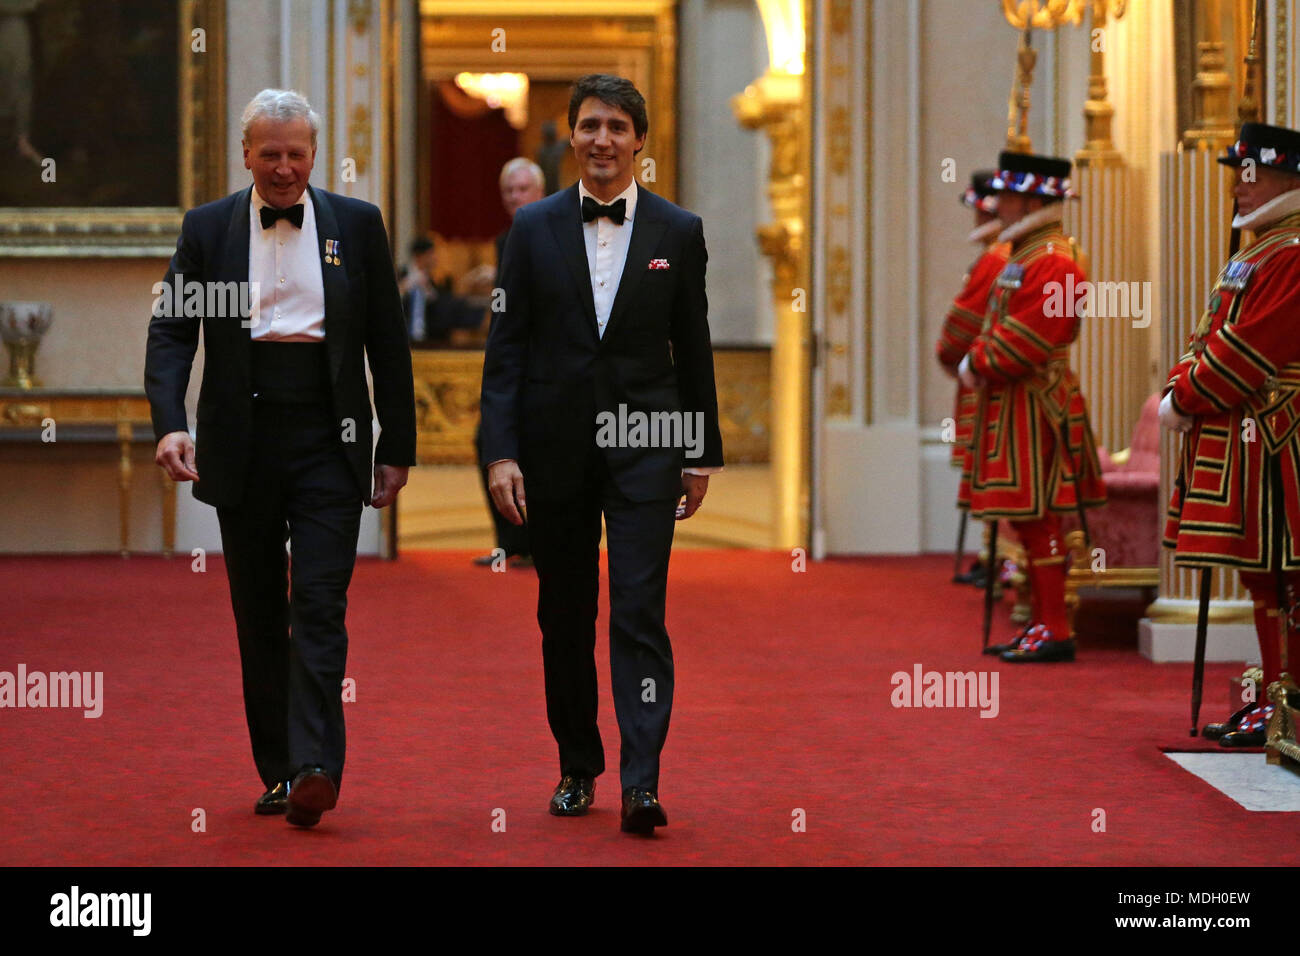 Canada's Prime Minister Justin Trudeau (right) arrives in the East Gallery at Buckingham Palace in London as Queen Elizabeth II hosts a dinner during the Commonwealth Heads of Government Meeting. Stock Photo